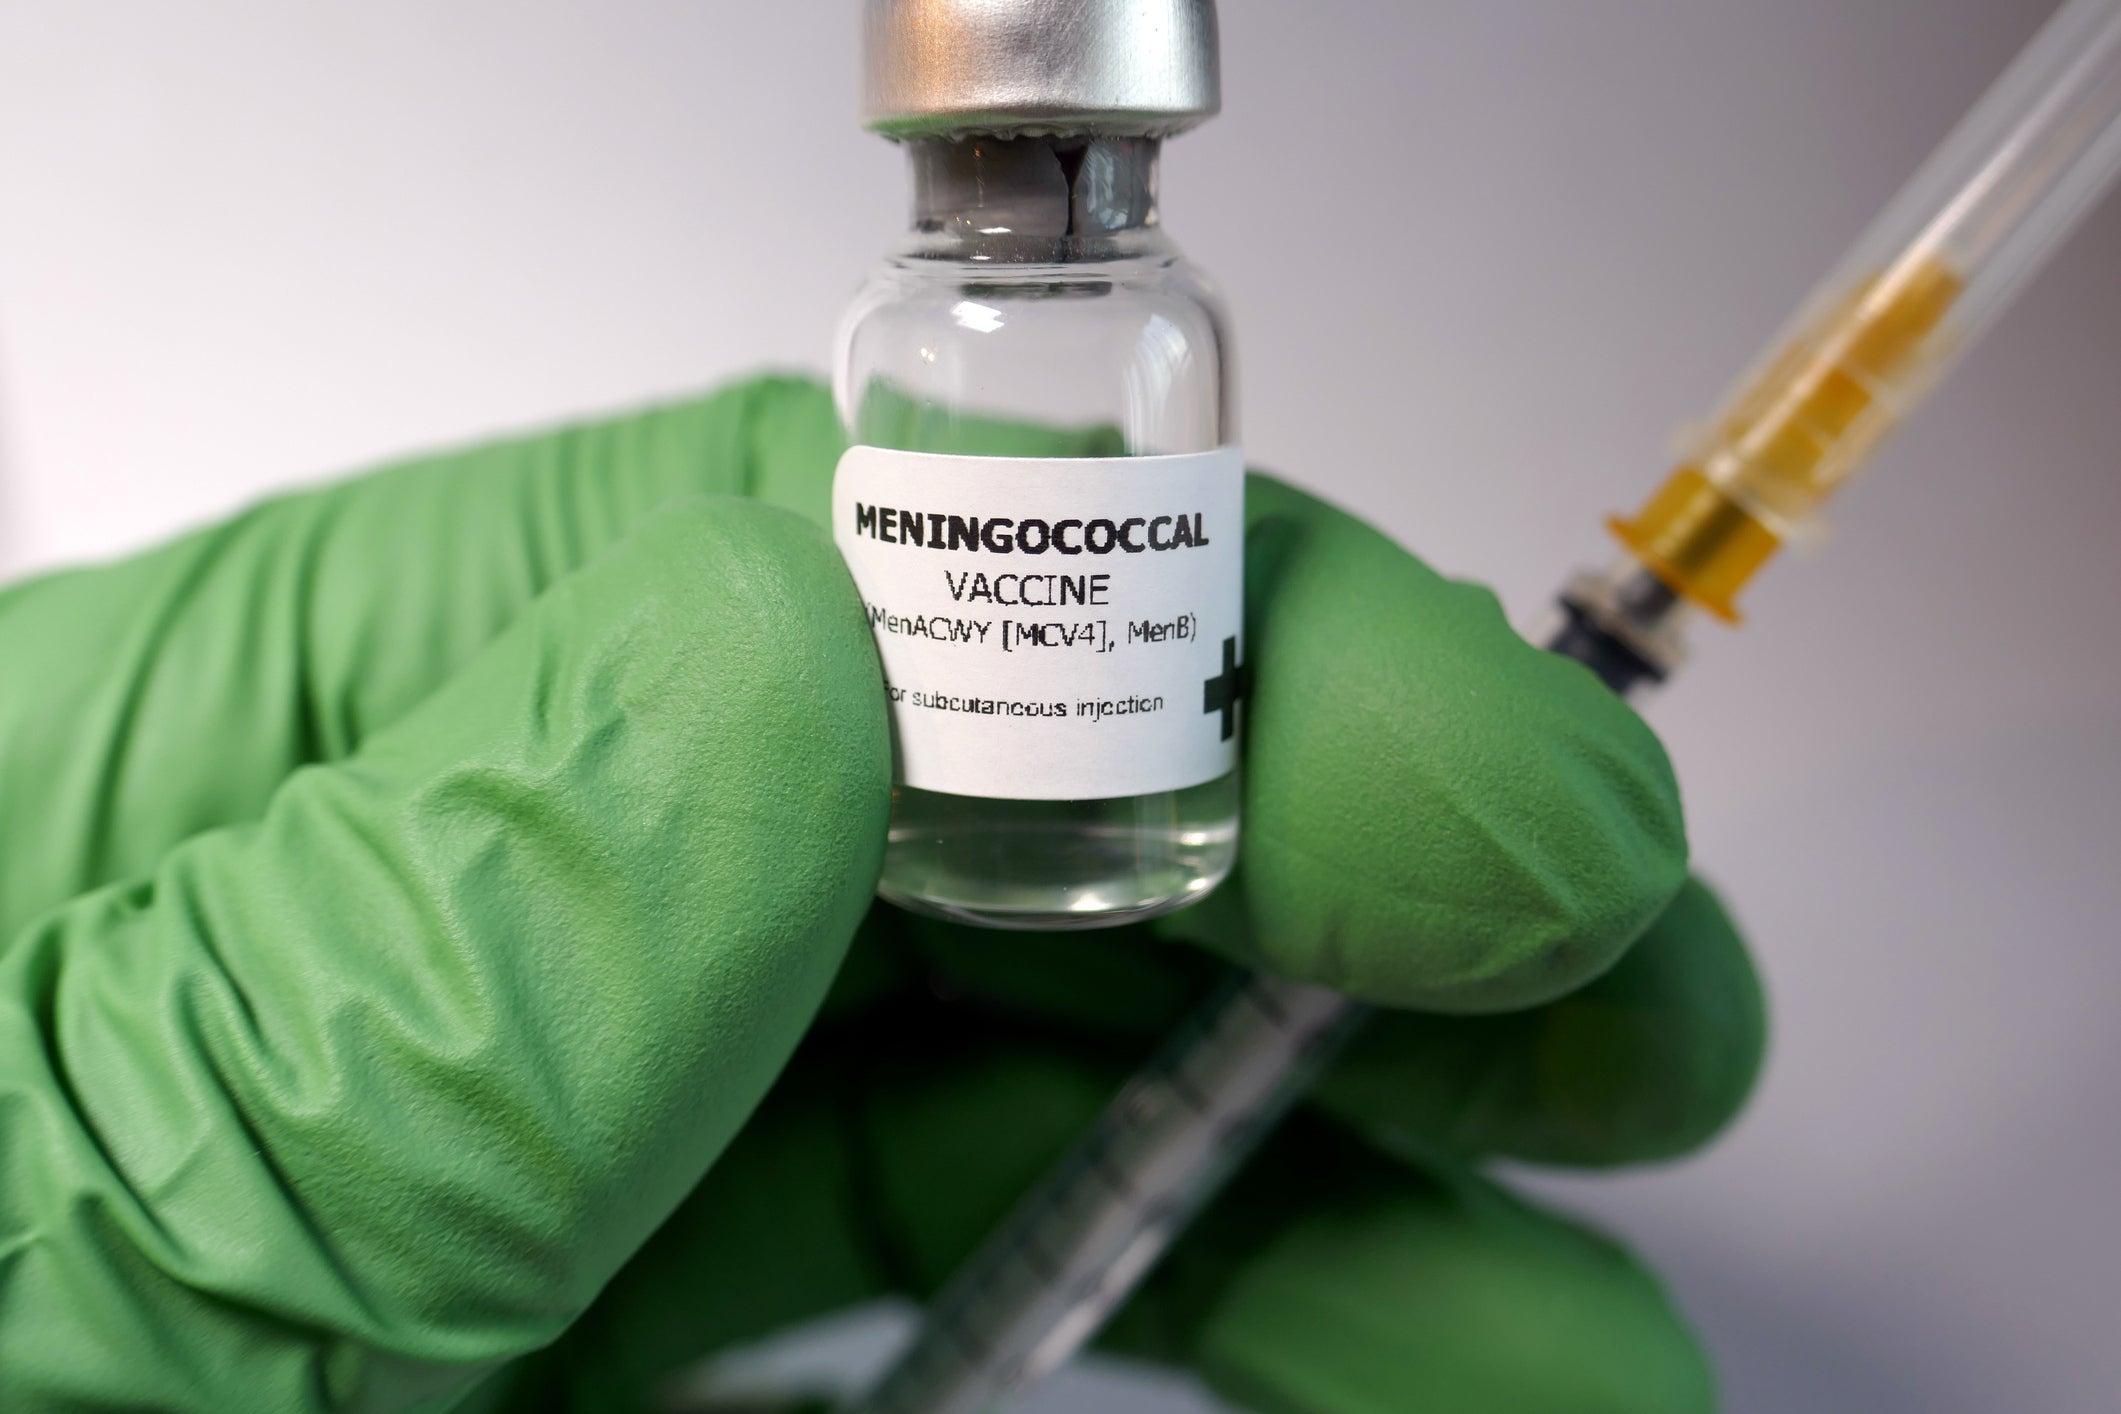 foreign office, britons, meningitis, uk issues urgent health warning after potentially lethal meningococcal disease detected